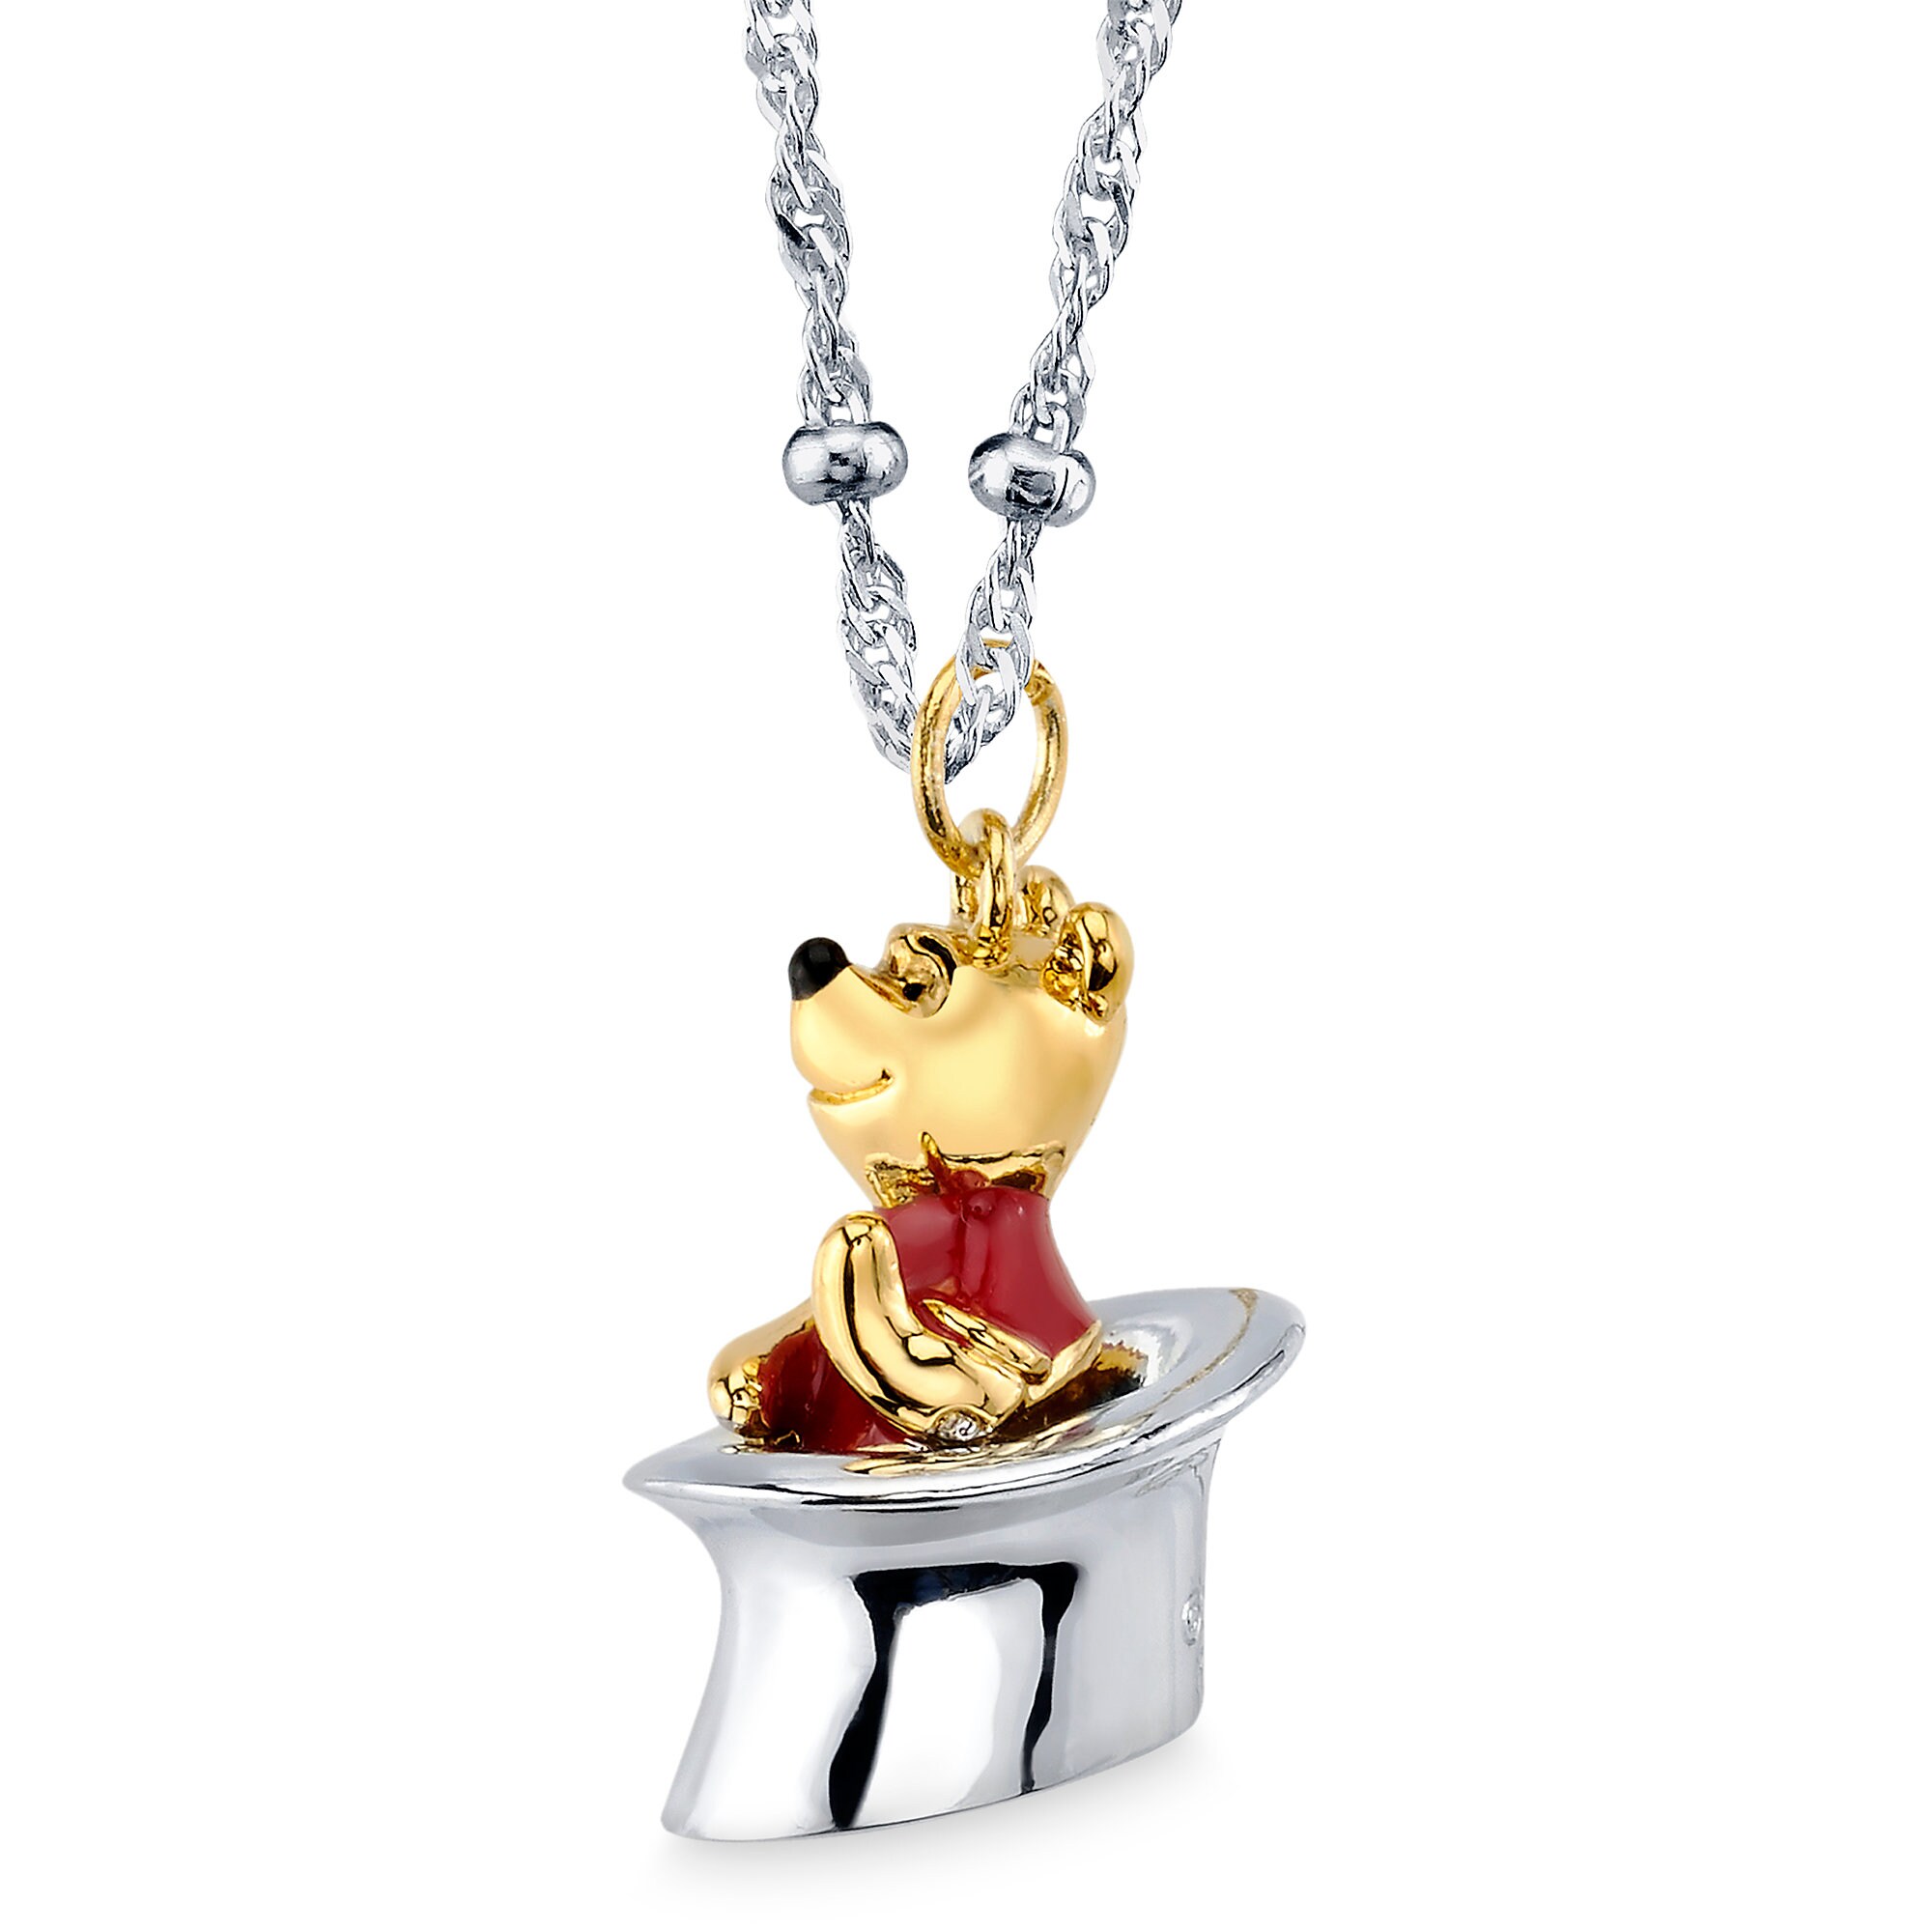 Winnie the Pooh Top Hat Necklace by RockLove - Christopher Robin